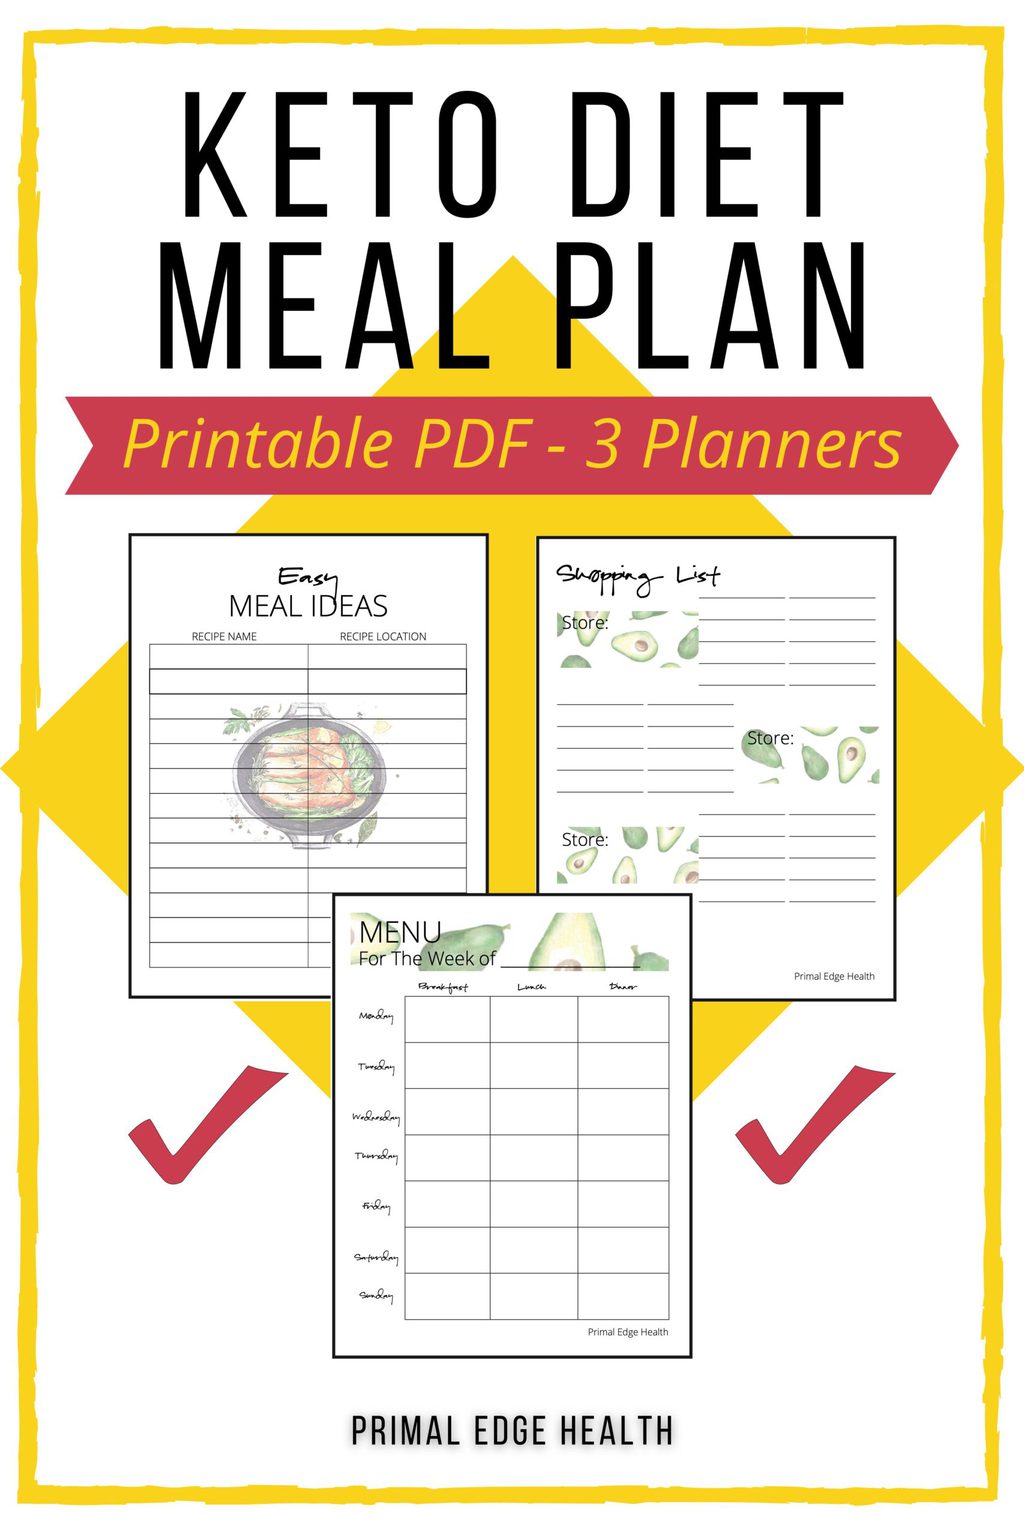 use-this-printable-keto-diet-meal-plan-to-help-you-get-started-on-the